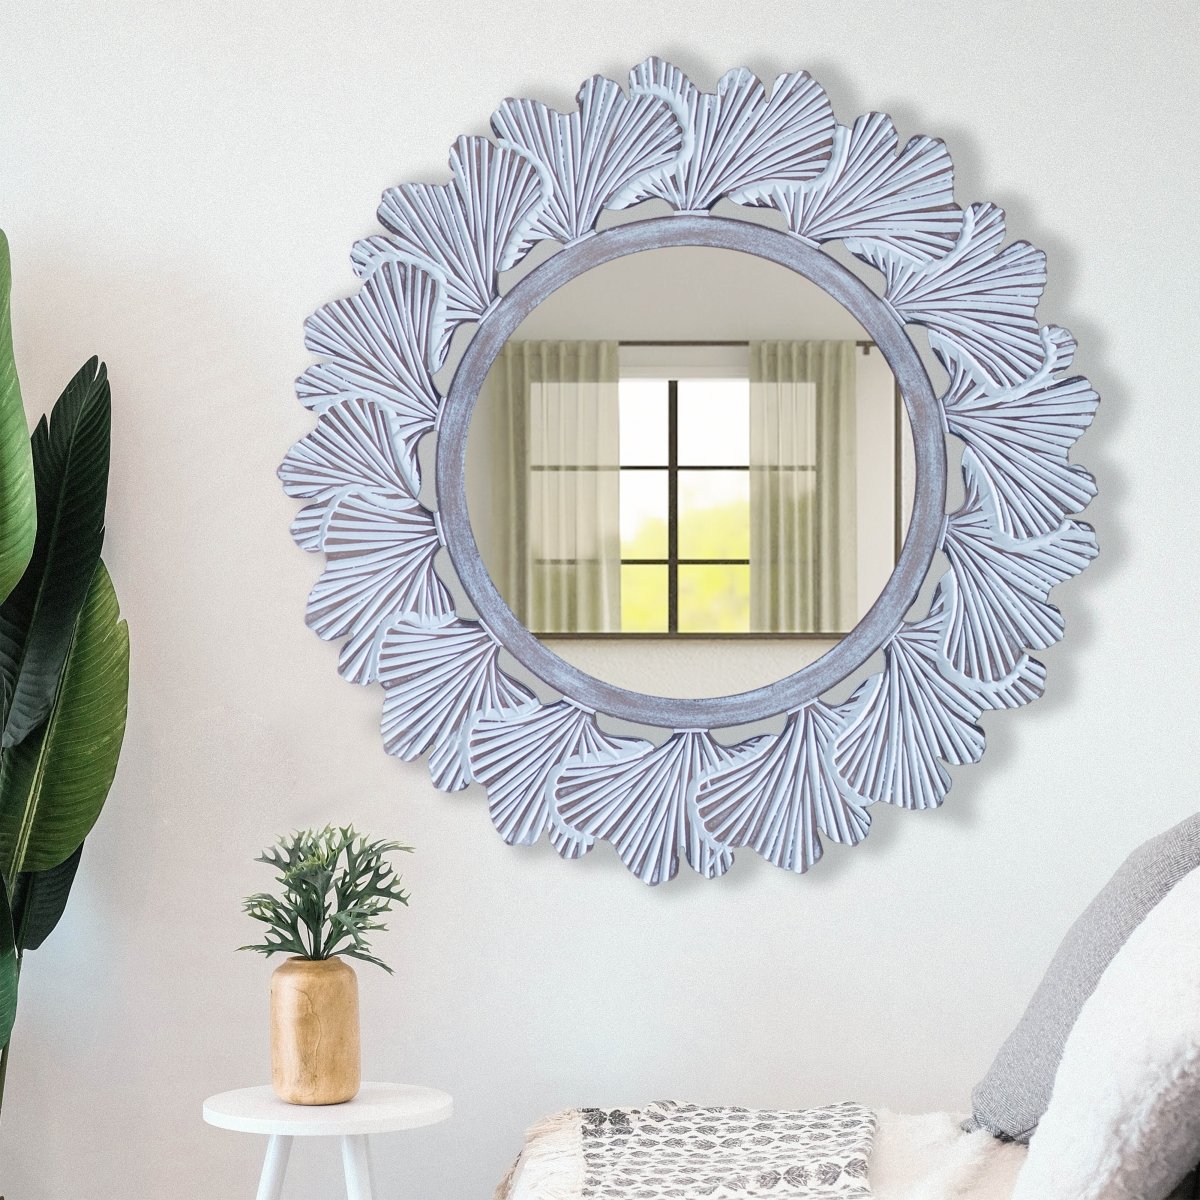 Kezevel Wooden Wall Hanging Mirror-Round White Brown Handcrafted Decorative Mirror for Living Room, Mirror Frame, Wall Mirror